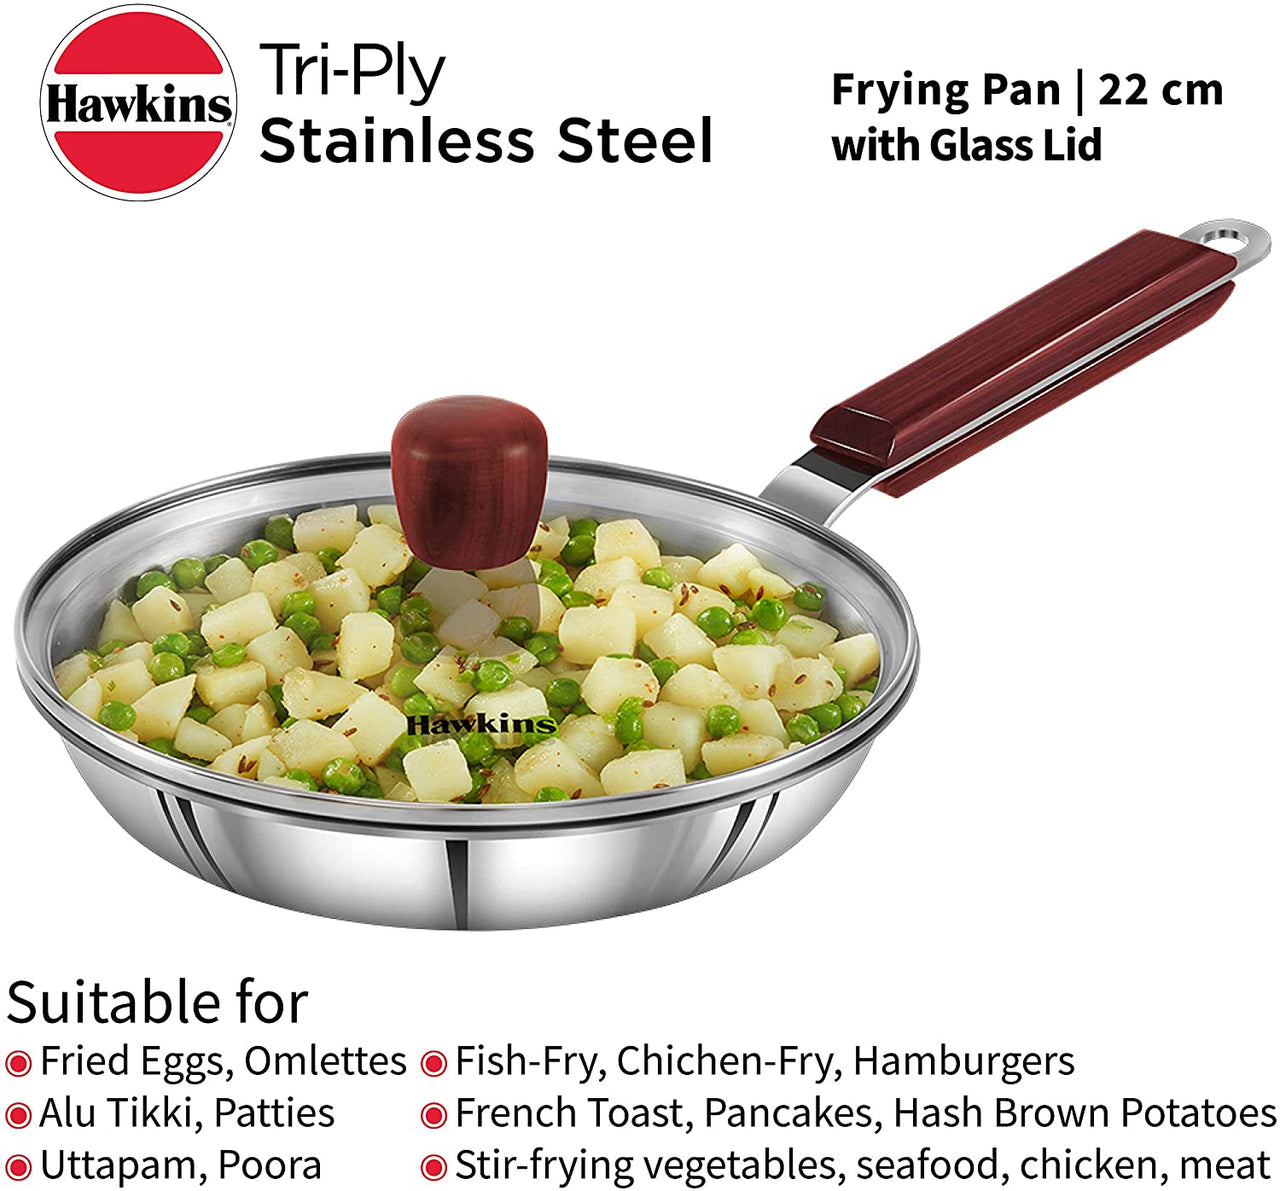 Hawkins Tri-ply Stainless Steel Frying Pan 22 cm with Glass Lid